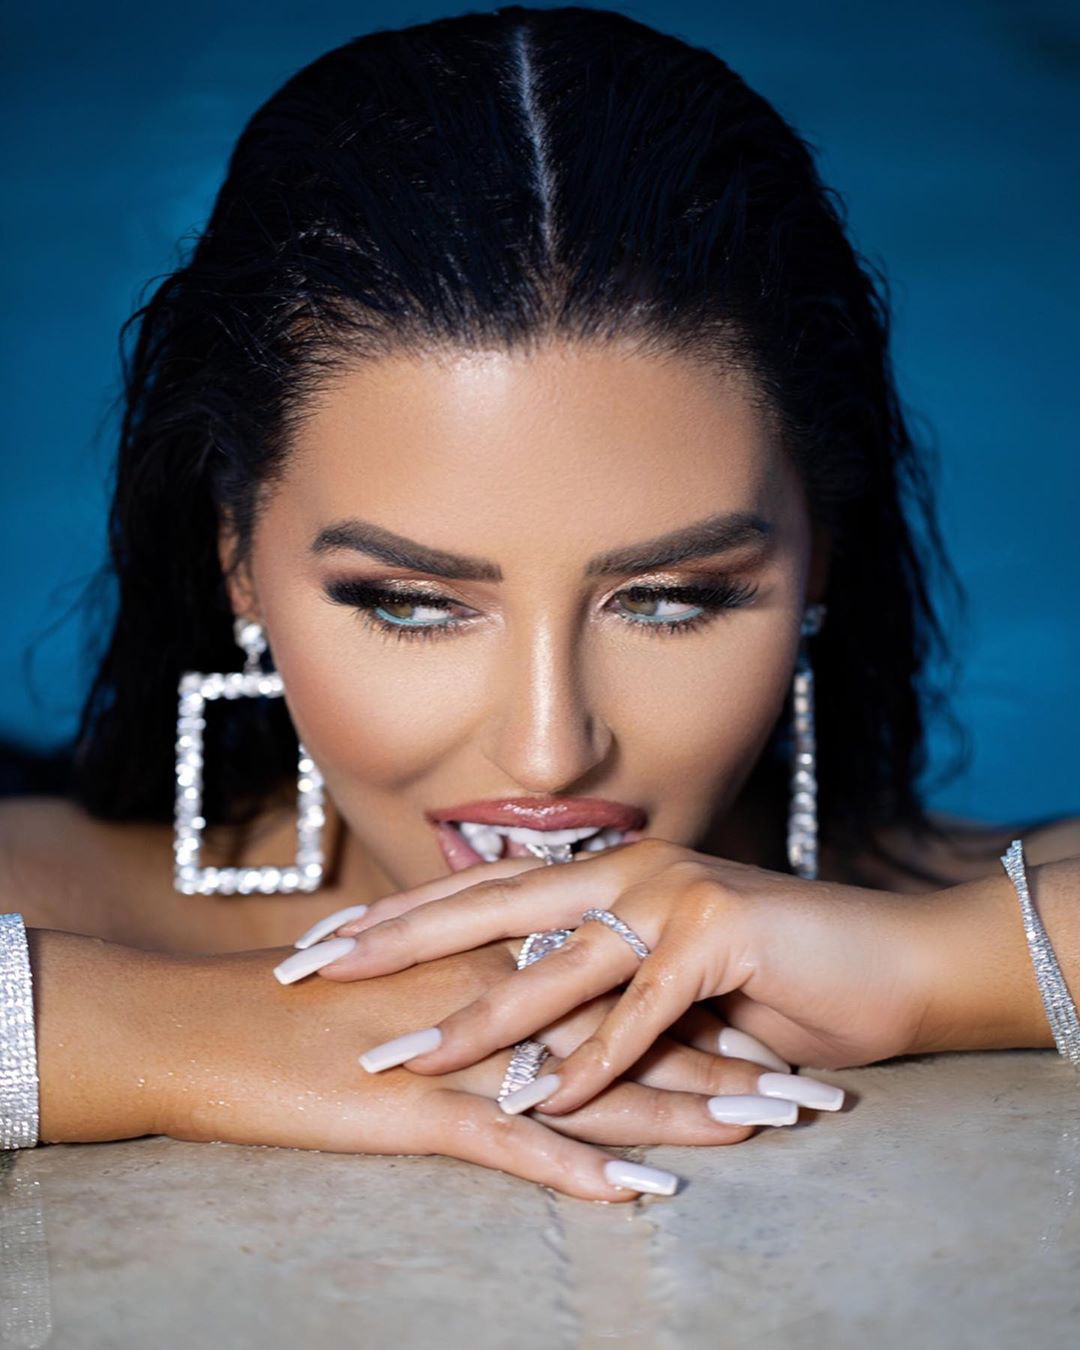 Cute Instagram Abigail Ratchford Pics: Instagram photos,  instagram profile picture,  most liked Instagram photo,  Jojo Babie,  Pretty Jojo Babie,  Instagram Abigail Ratchford,  Hot Instagram Models,  Hot Abigail Ratchford  